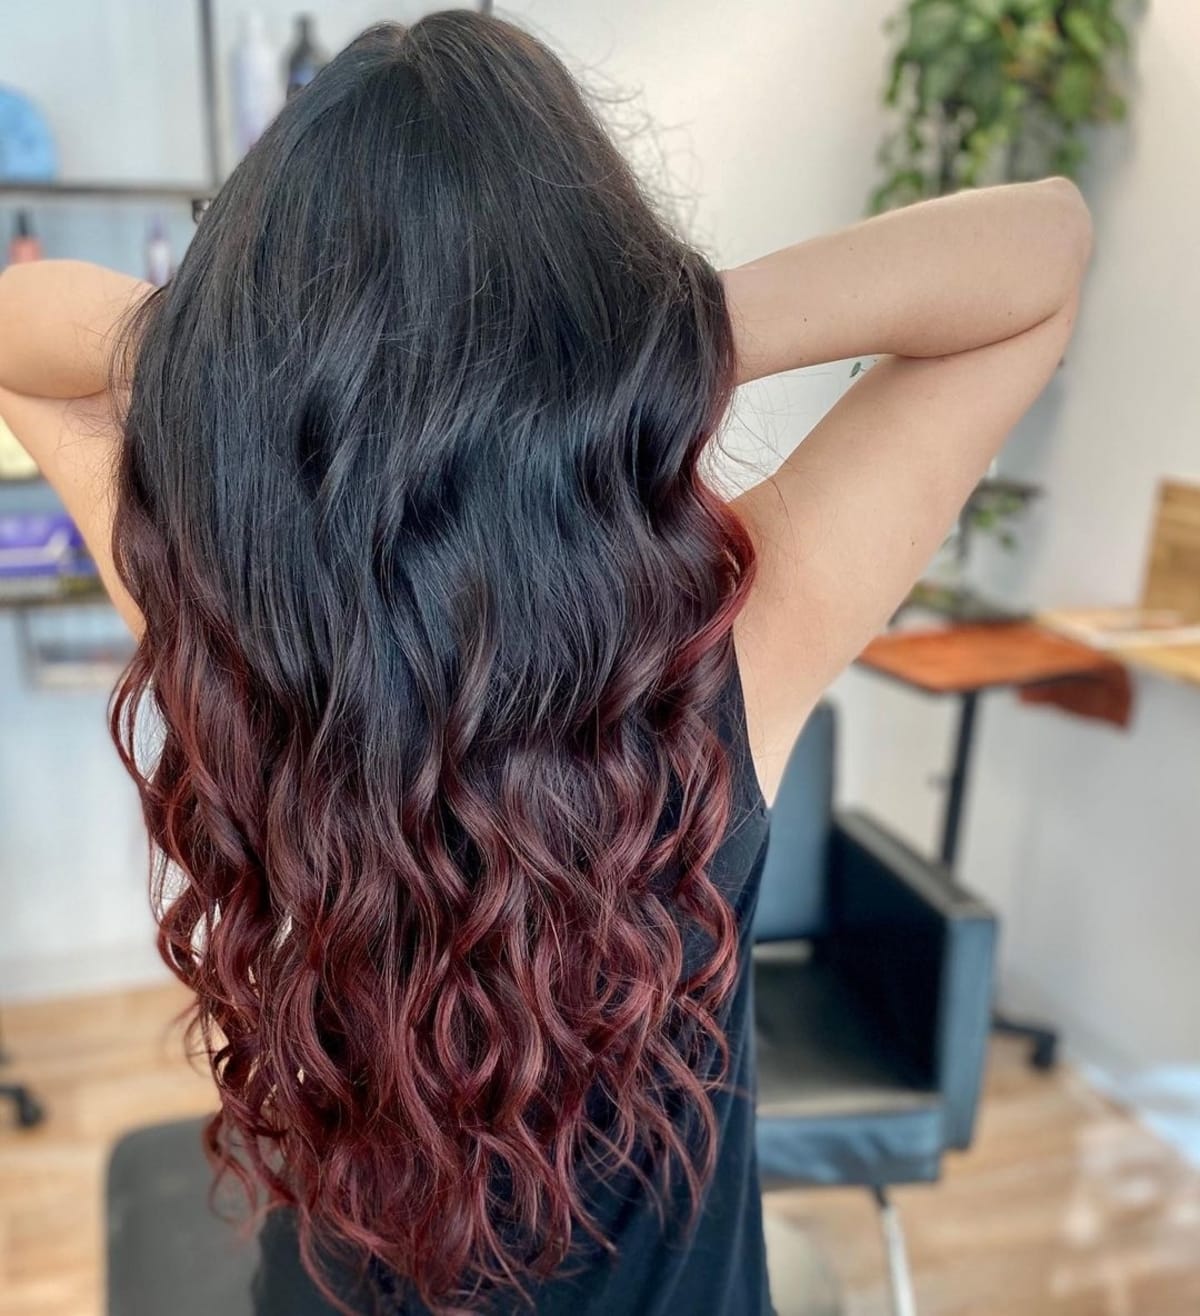 31 Best Maroon Hair Color Ideas of 2021 Are Here